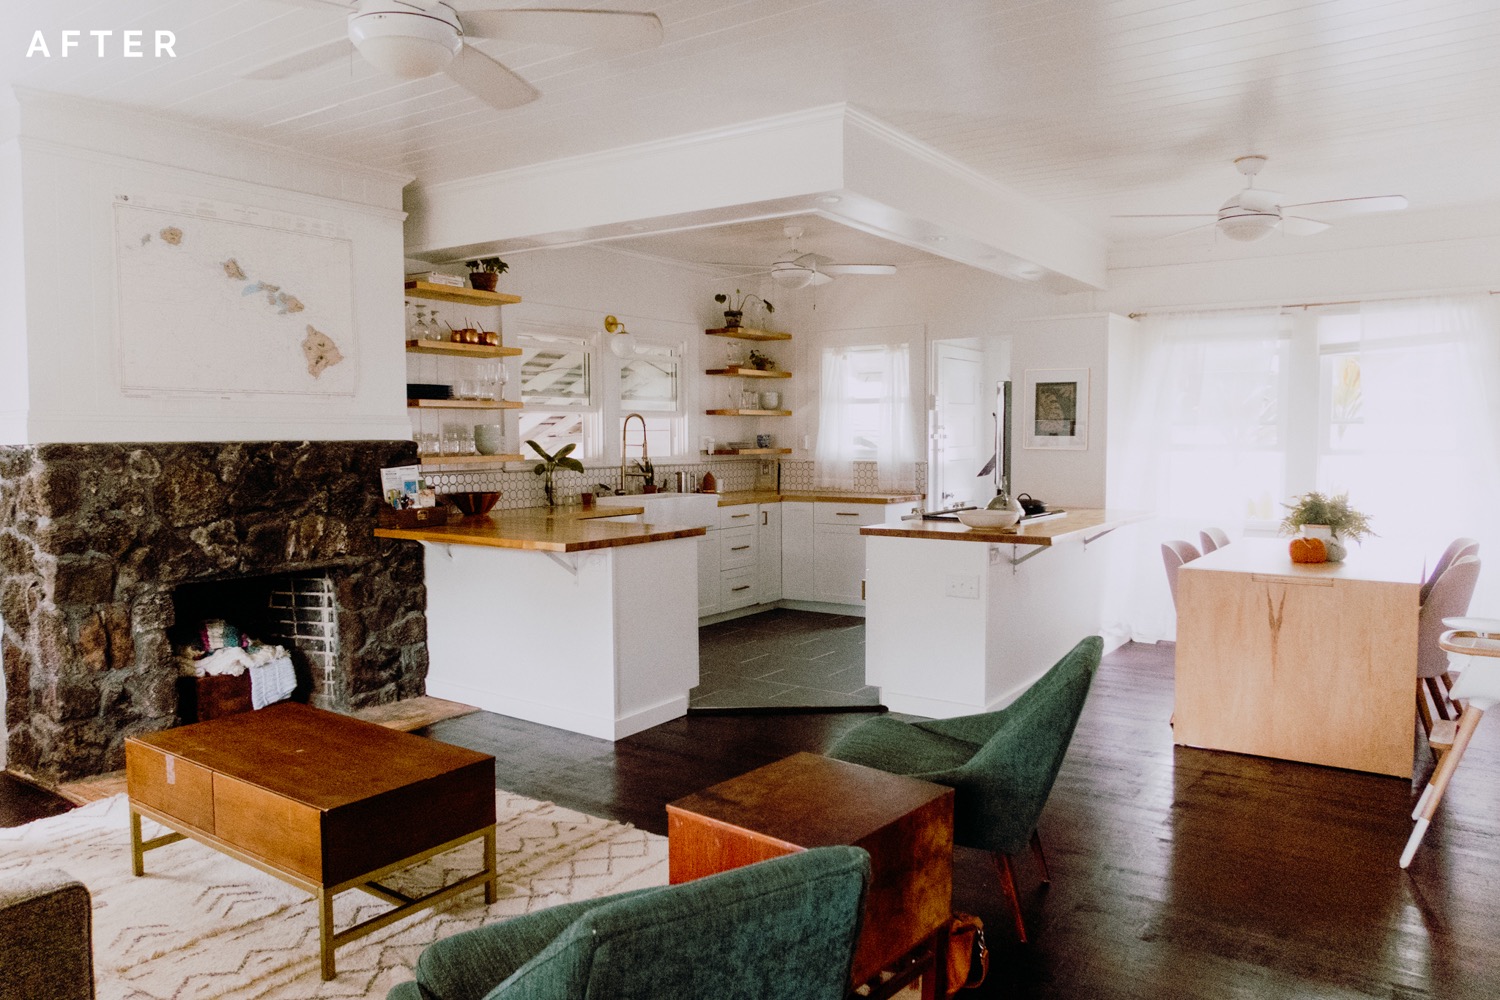 7 Ways To Authentically Style Your Farmhouse Kitchen/Diner - My